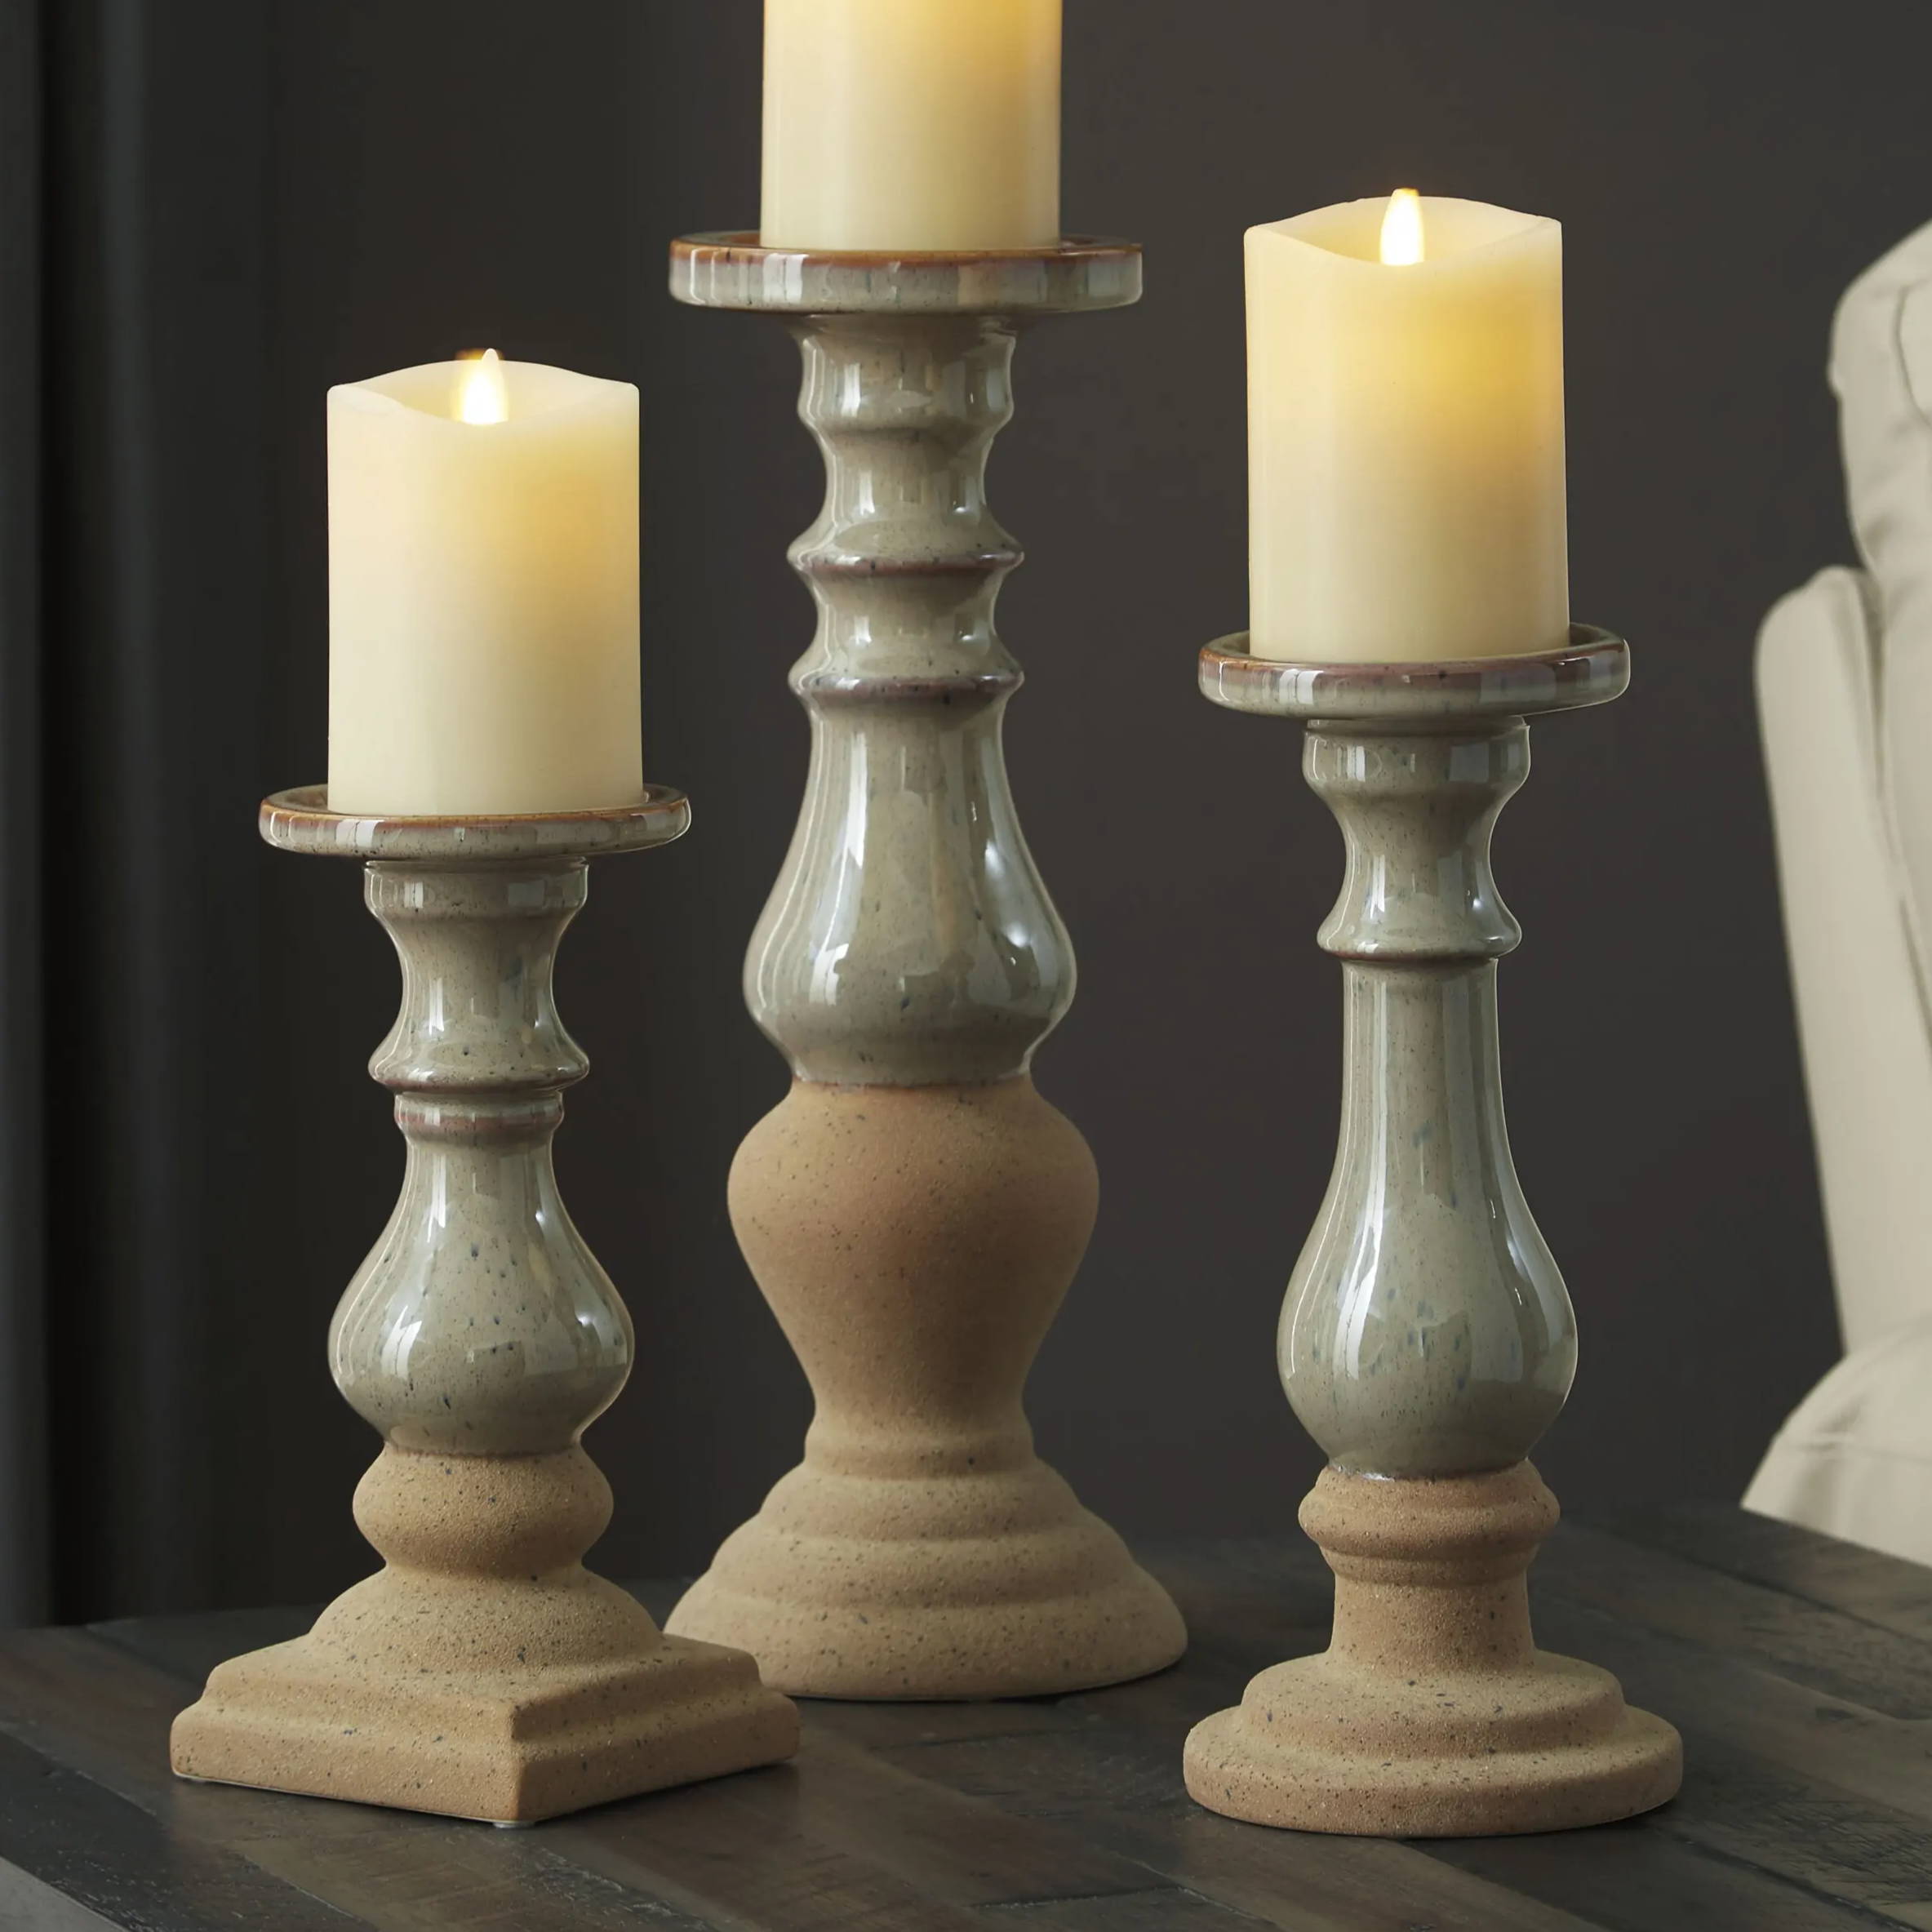 three lit candles sit on farmhouse-style candle holders.